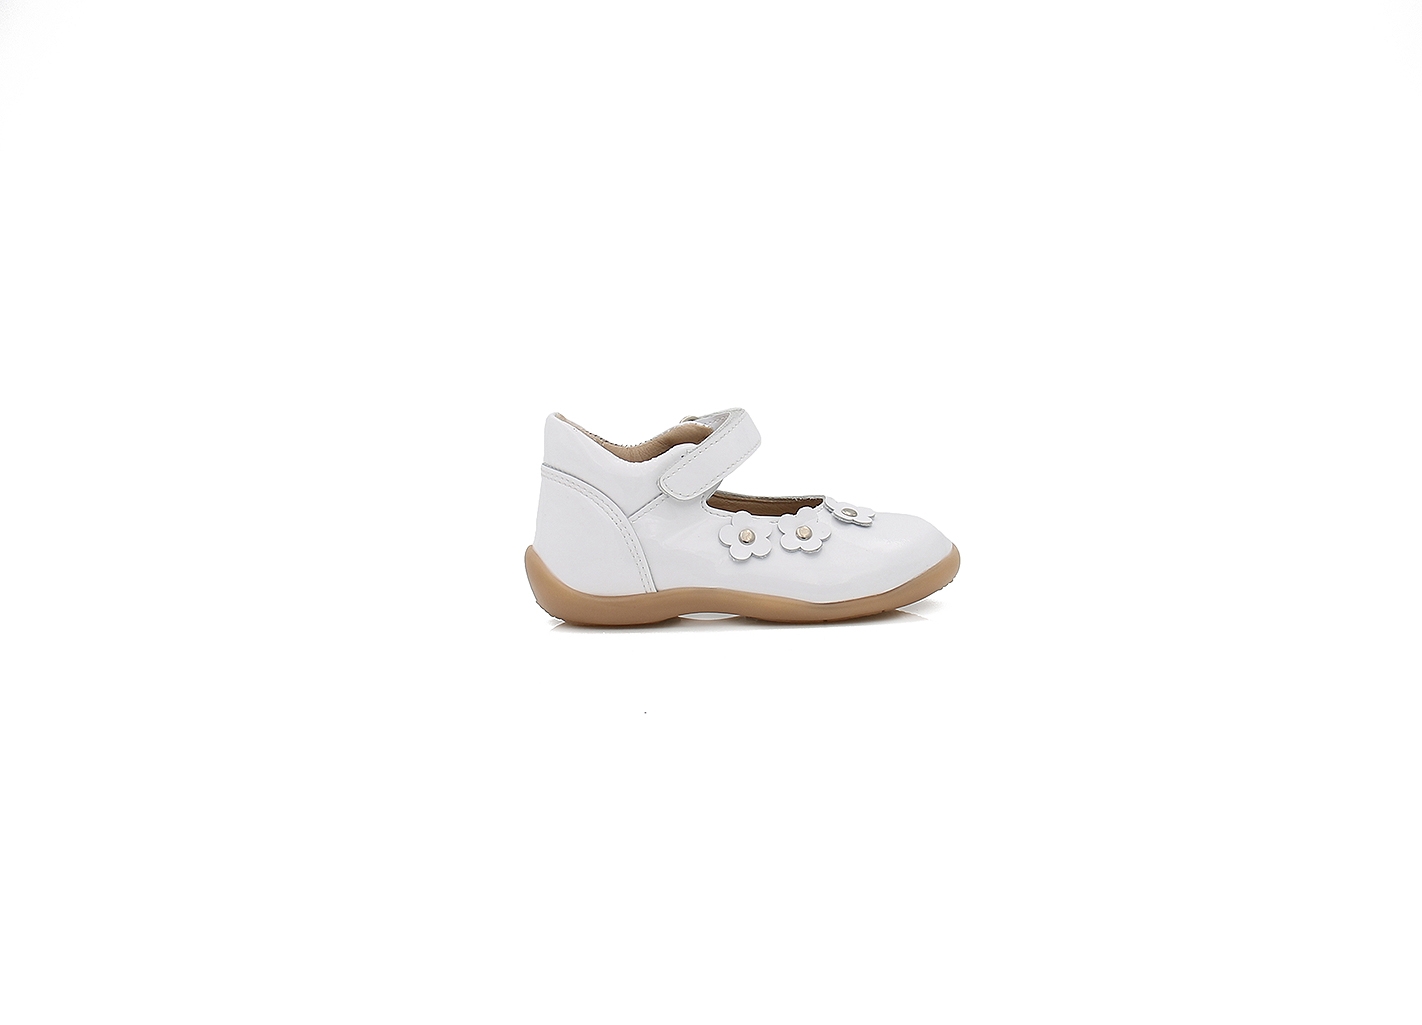 Womens Petasil Freya – White Patent Casual Shoes – Velcro – Strong Heel Support – Fastening Opens Fully – Size 24 / Width F – Patent / Leather